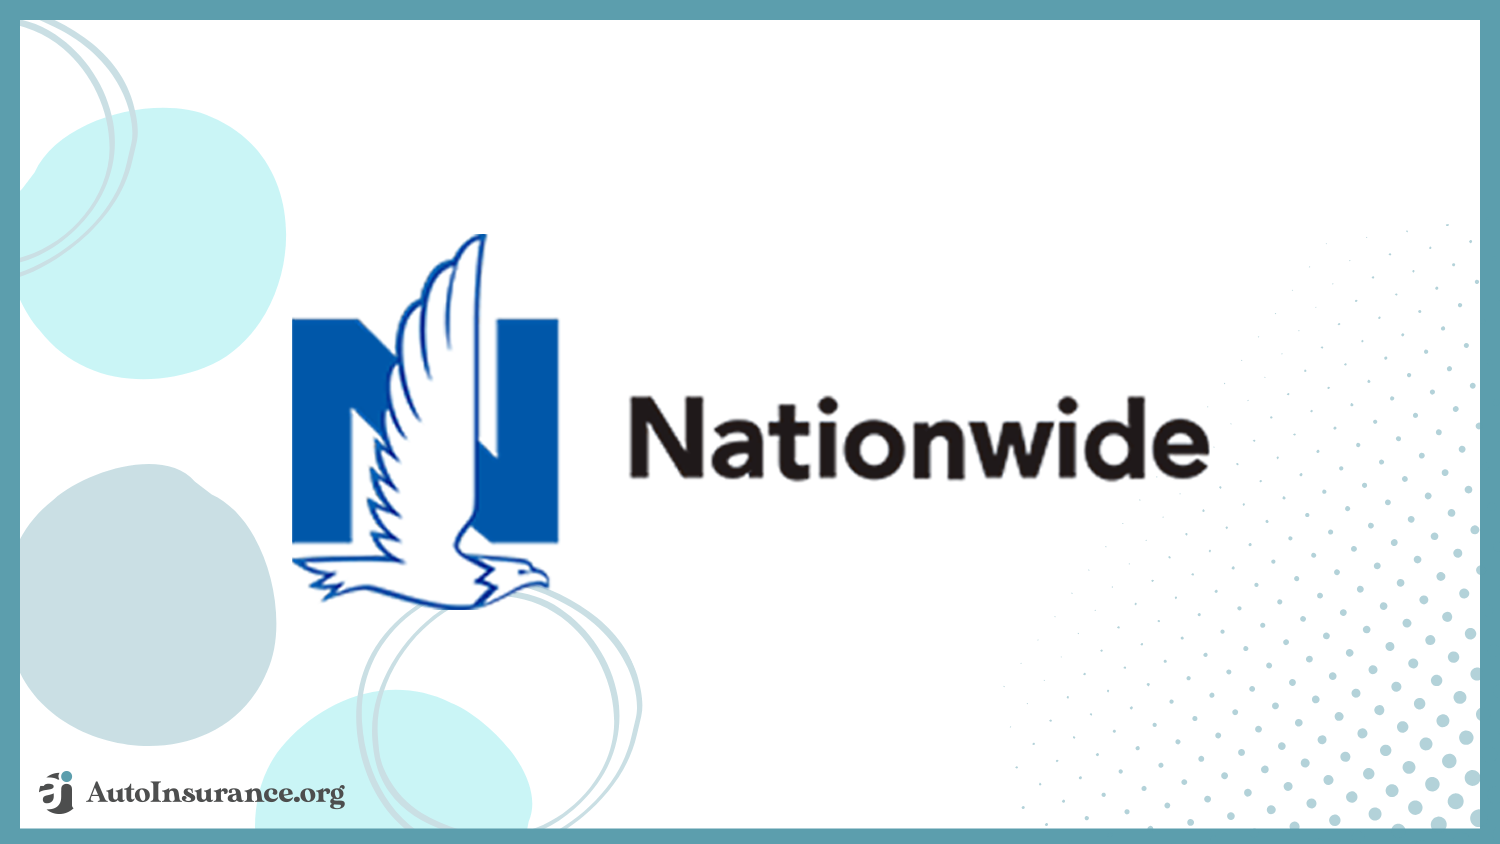 Nationwide: Best Auto Insurance Companies That Don't Ask for Your SSN